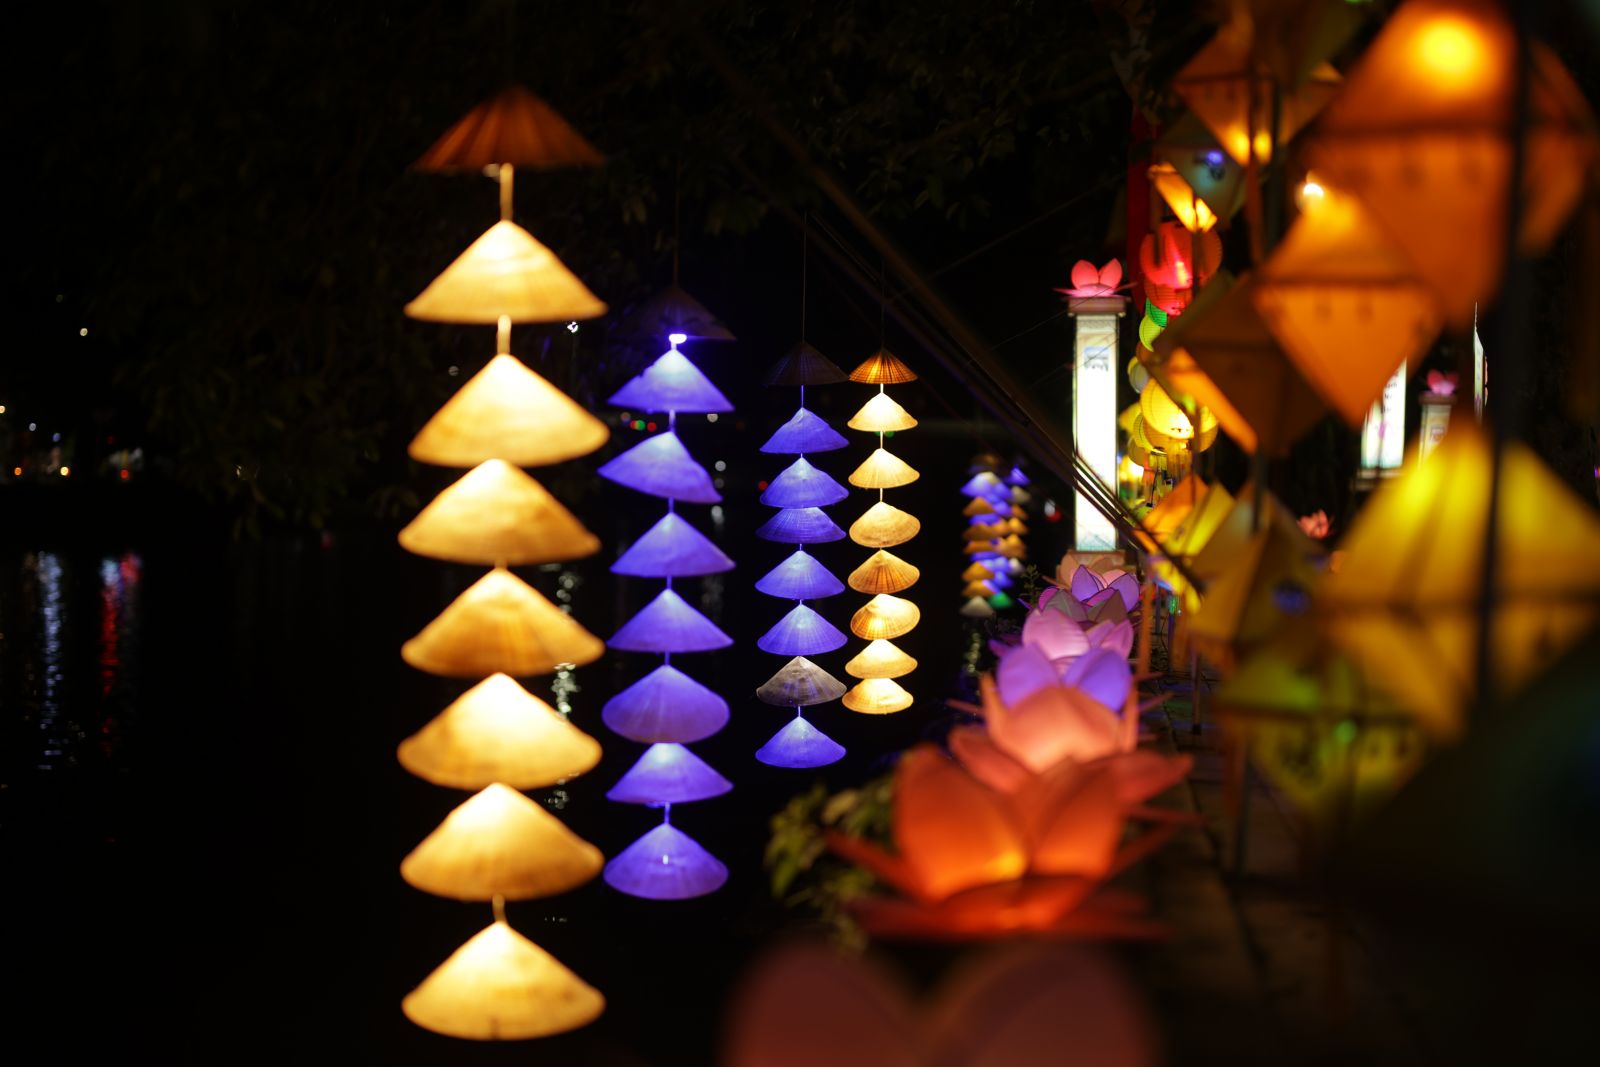 Magical colors at night from the lanterns